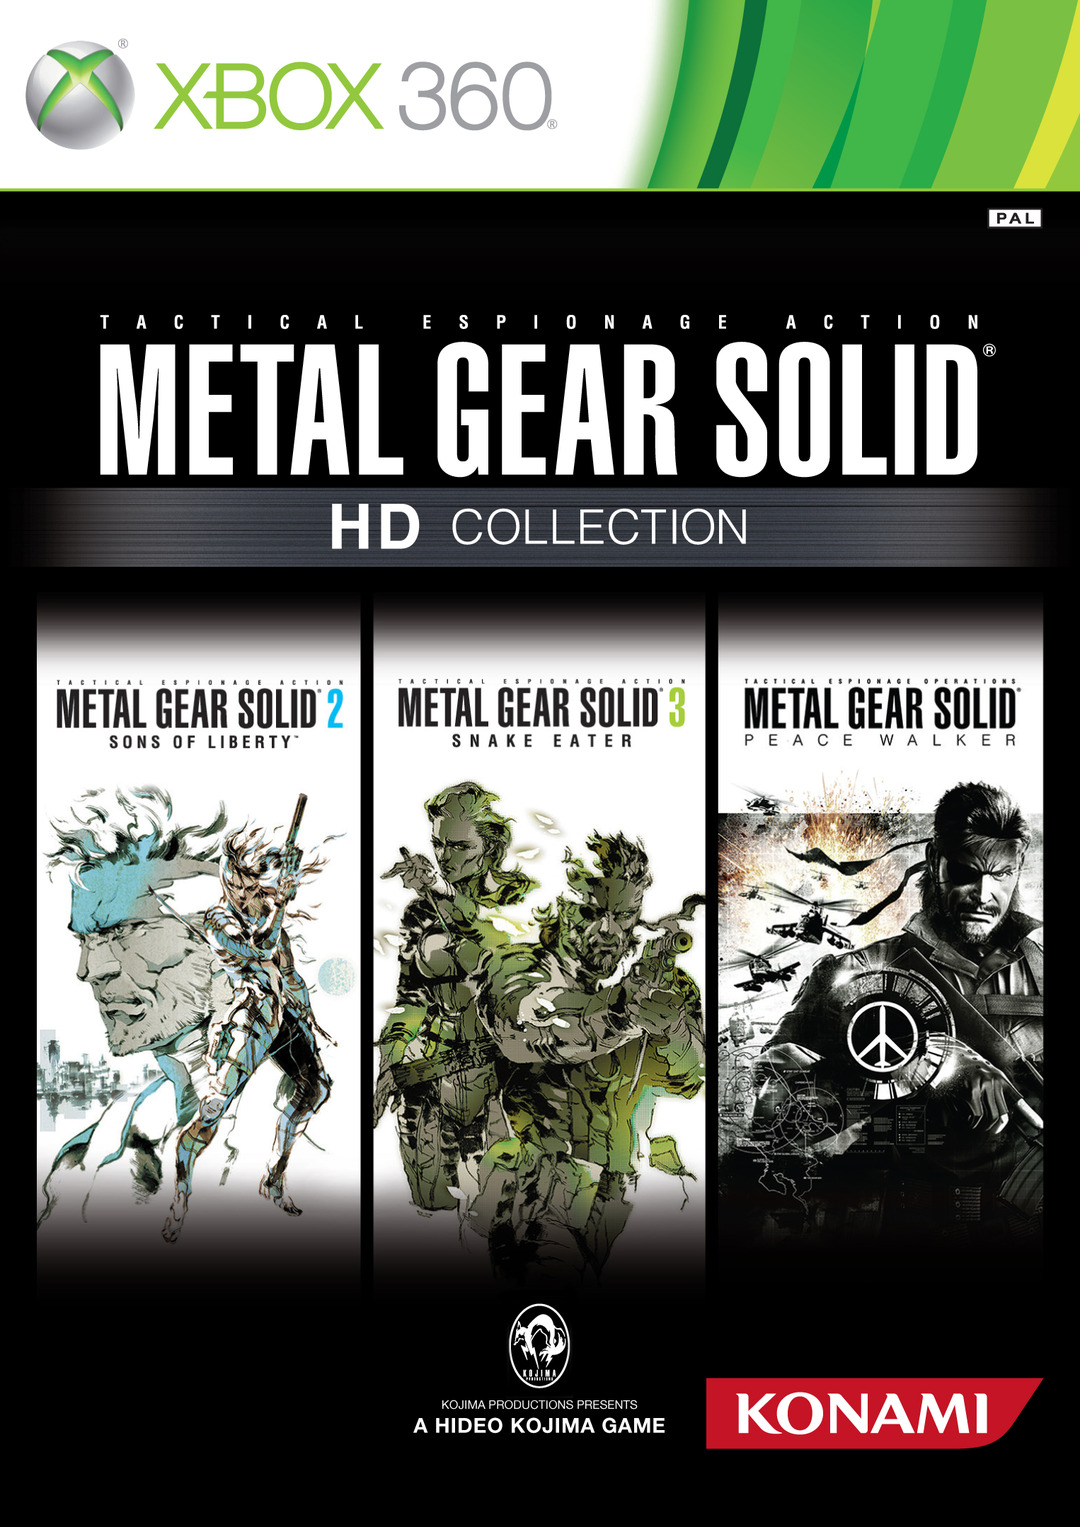 Metal Gear Solid HD Collection NTSC XBOX360 (exclue) [FS]  Jaquette-metal-gear-solid-hd-collection-xbox-360-cover-avant-g-1313607094